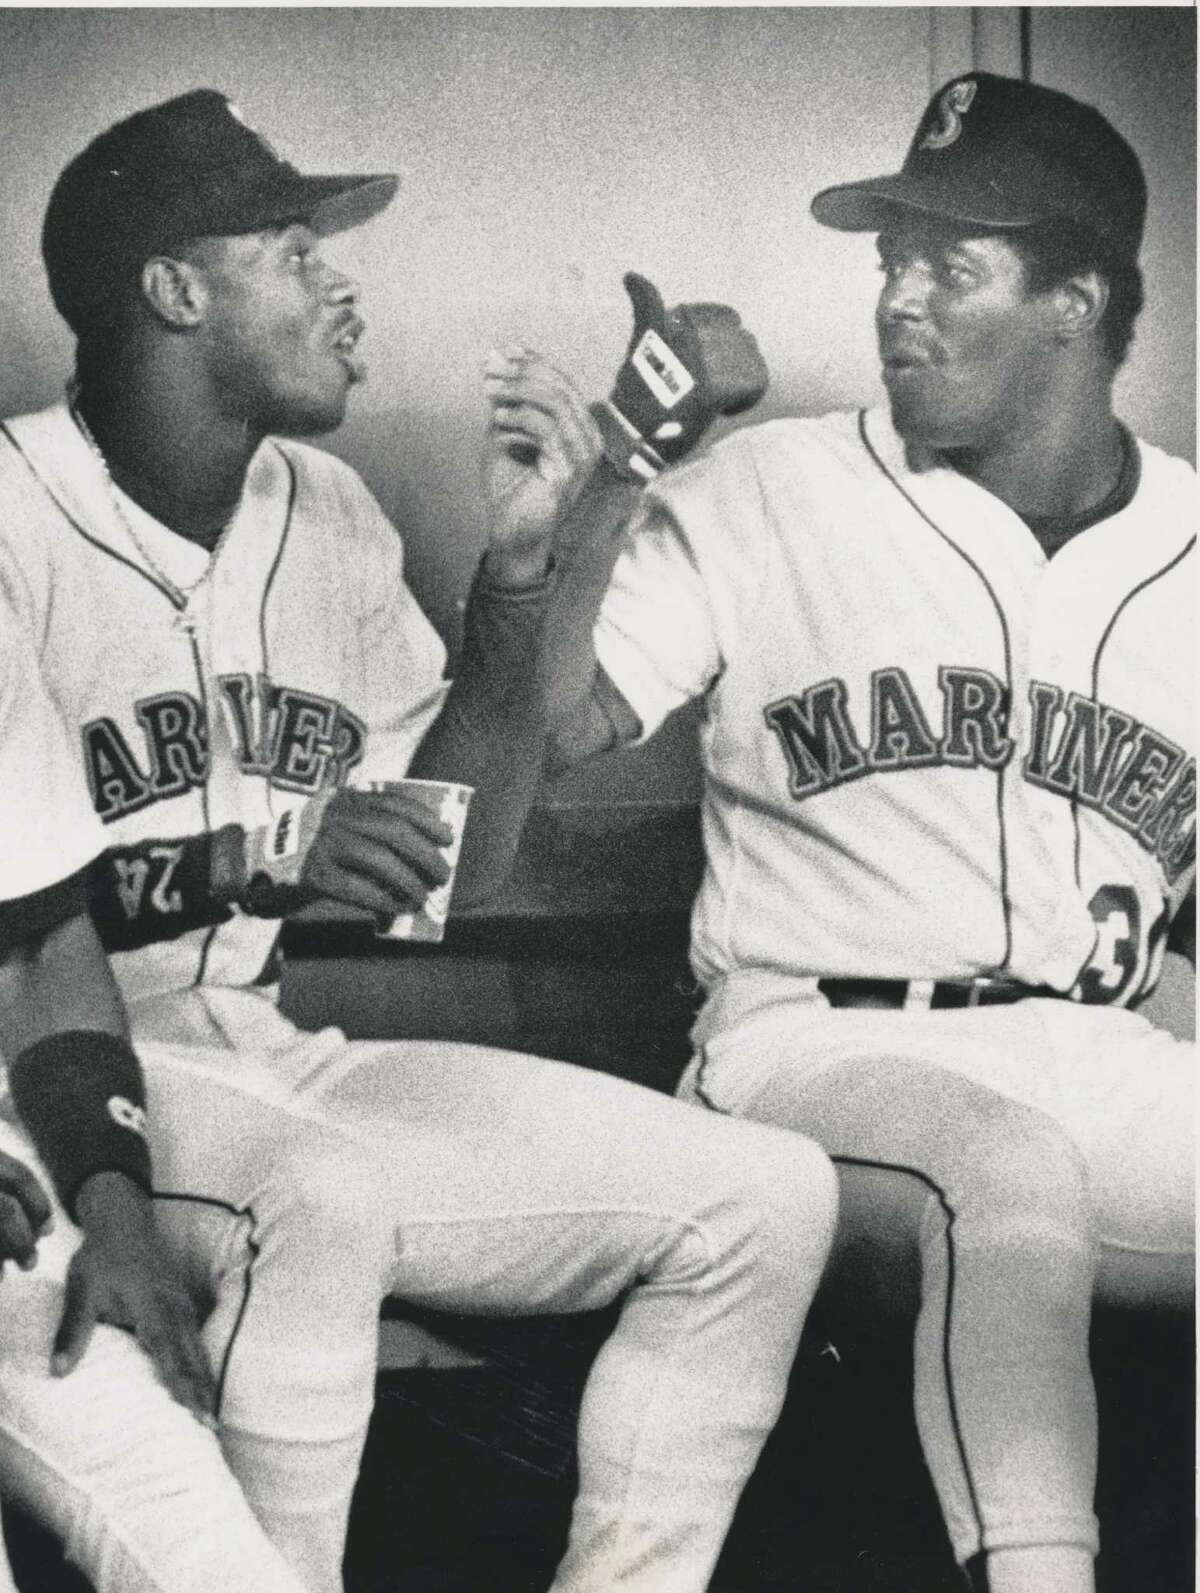 Original caption dated August 31, 1990: "Ken Griffey Sr. talking to son Ken Jr. after a play in the outfield where he almost made a sliding catch." Seattle P-I Collection image number 2000.107.079.19.06